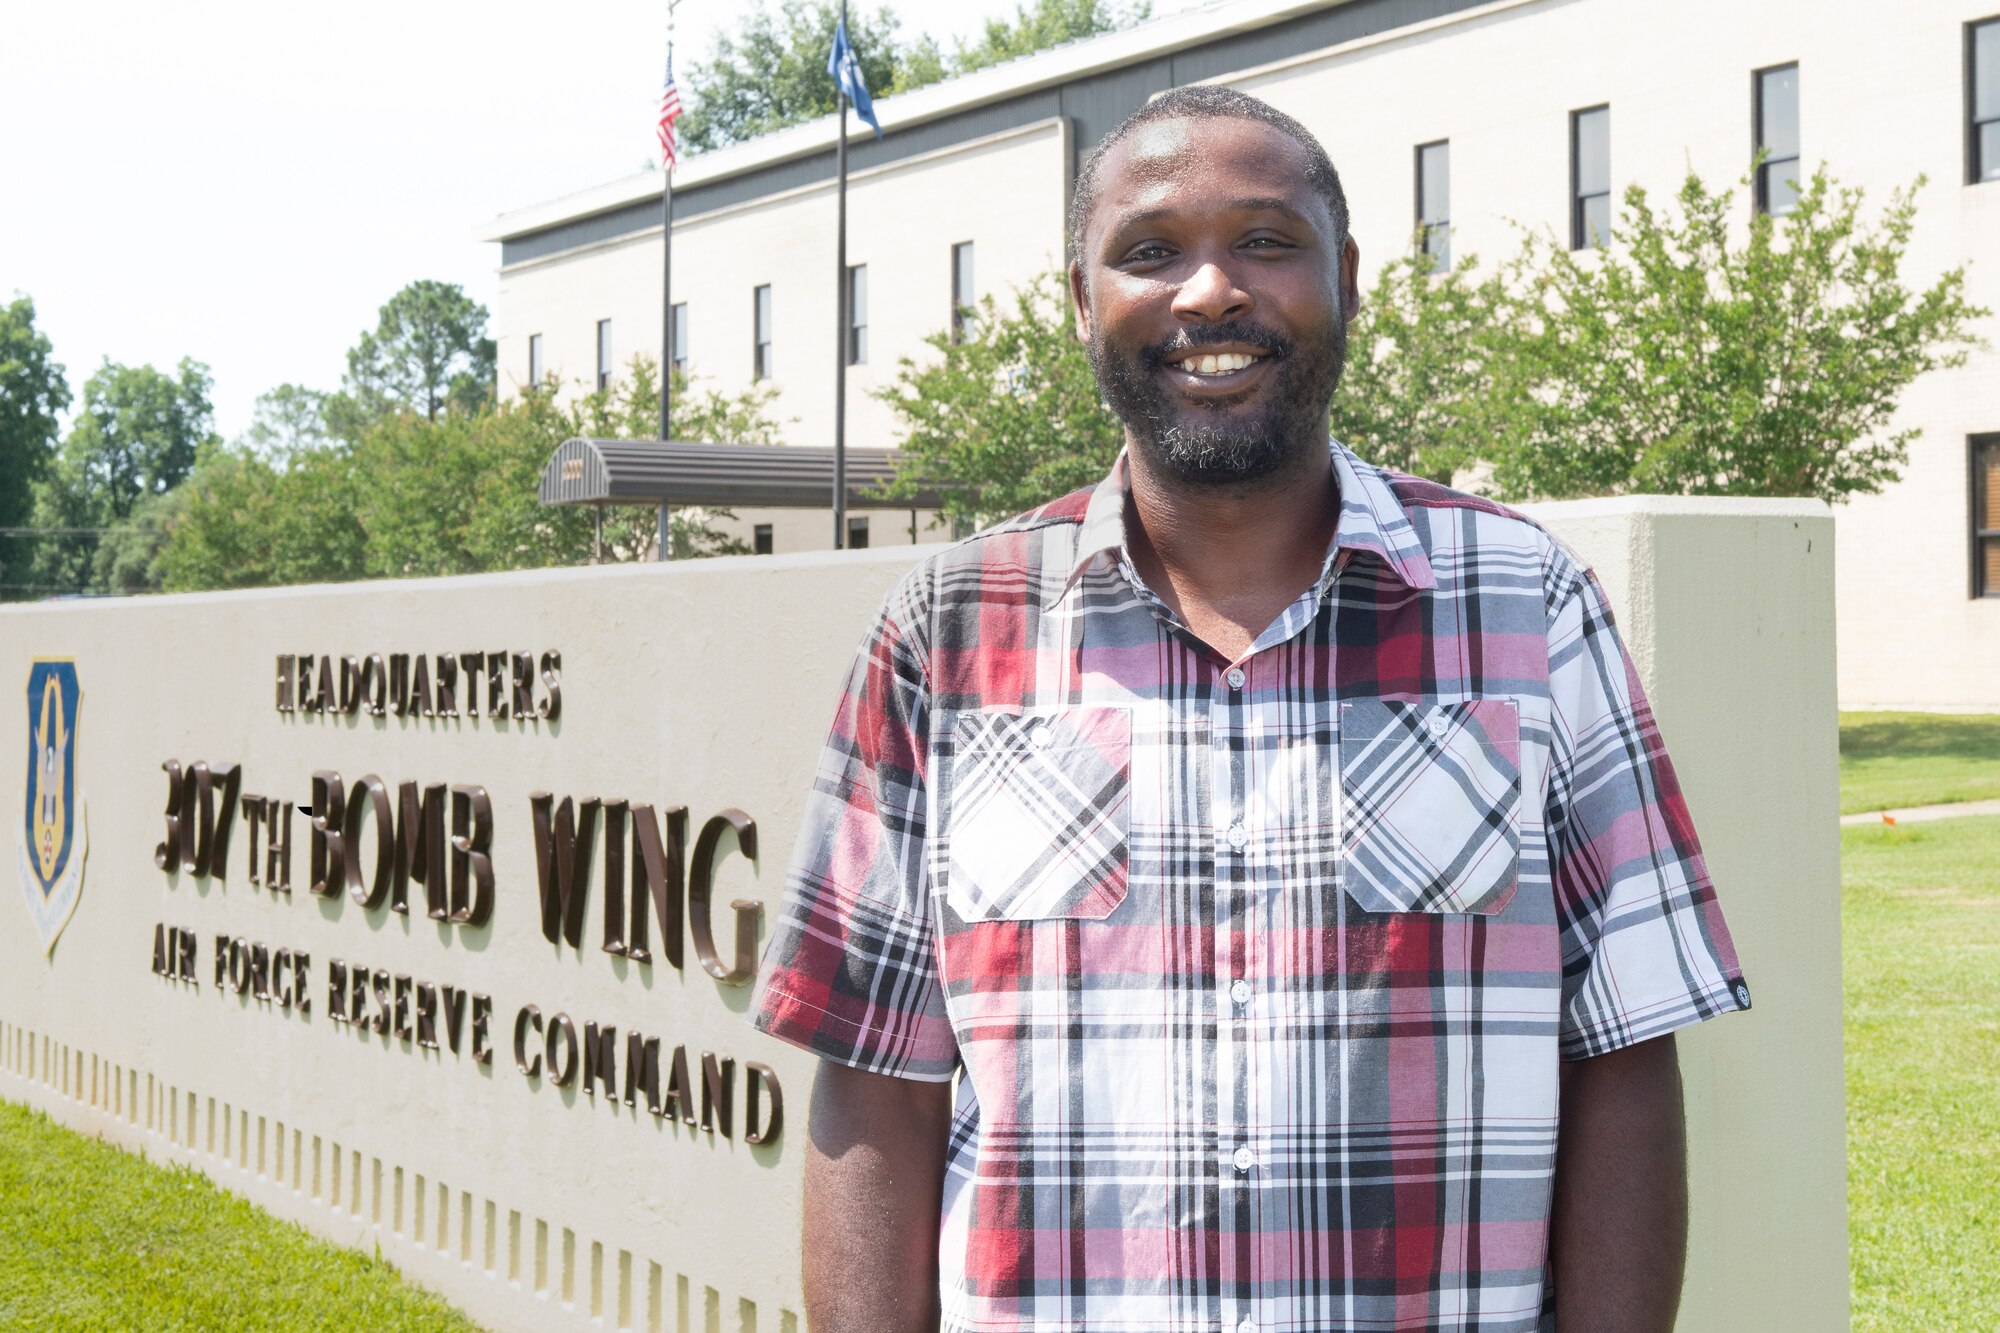 Phillip Floyd, 307th Bomb Wing budget technician, stands in front of the 307th's headquarters building at Barksdale Air Force Base, Louisiana, June 19, 2019. Floyd recently became the first recipient of the Elsie Steffany Memorial Scholarship, which will help to offset the costs of his efforts to earn the Department of Defense Financial Manager Certification. (U.S. Air Force photo by Master Sgt. Ted Daigle)